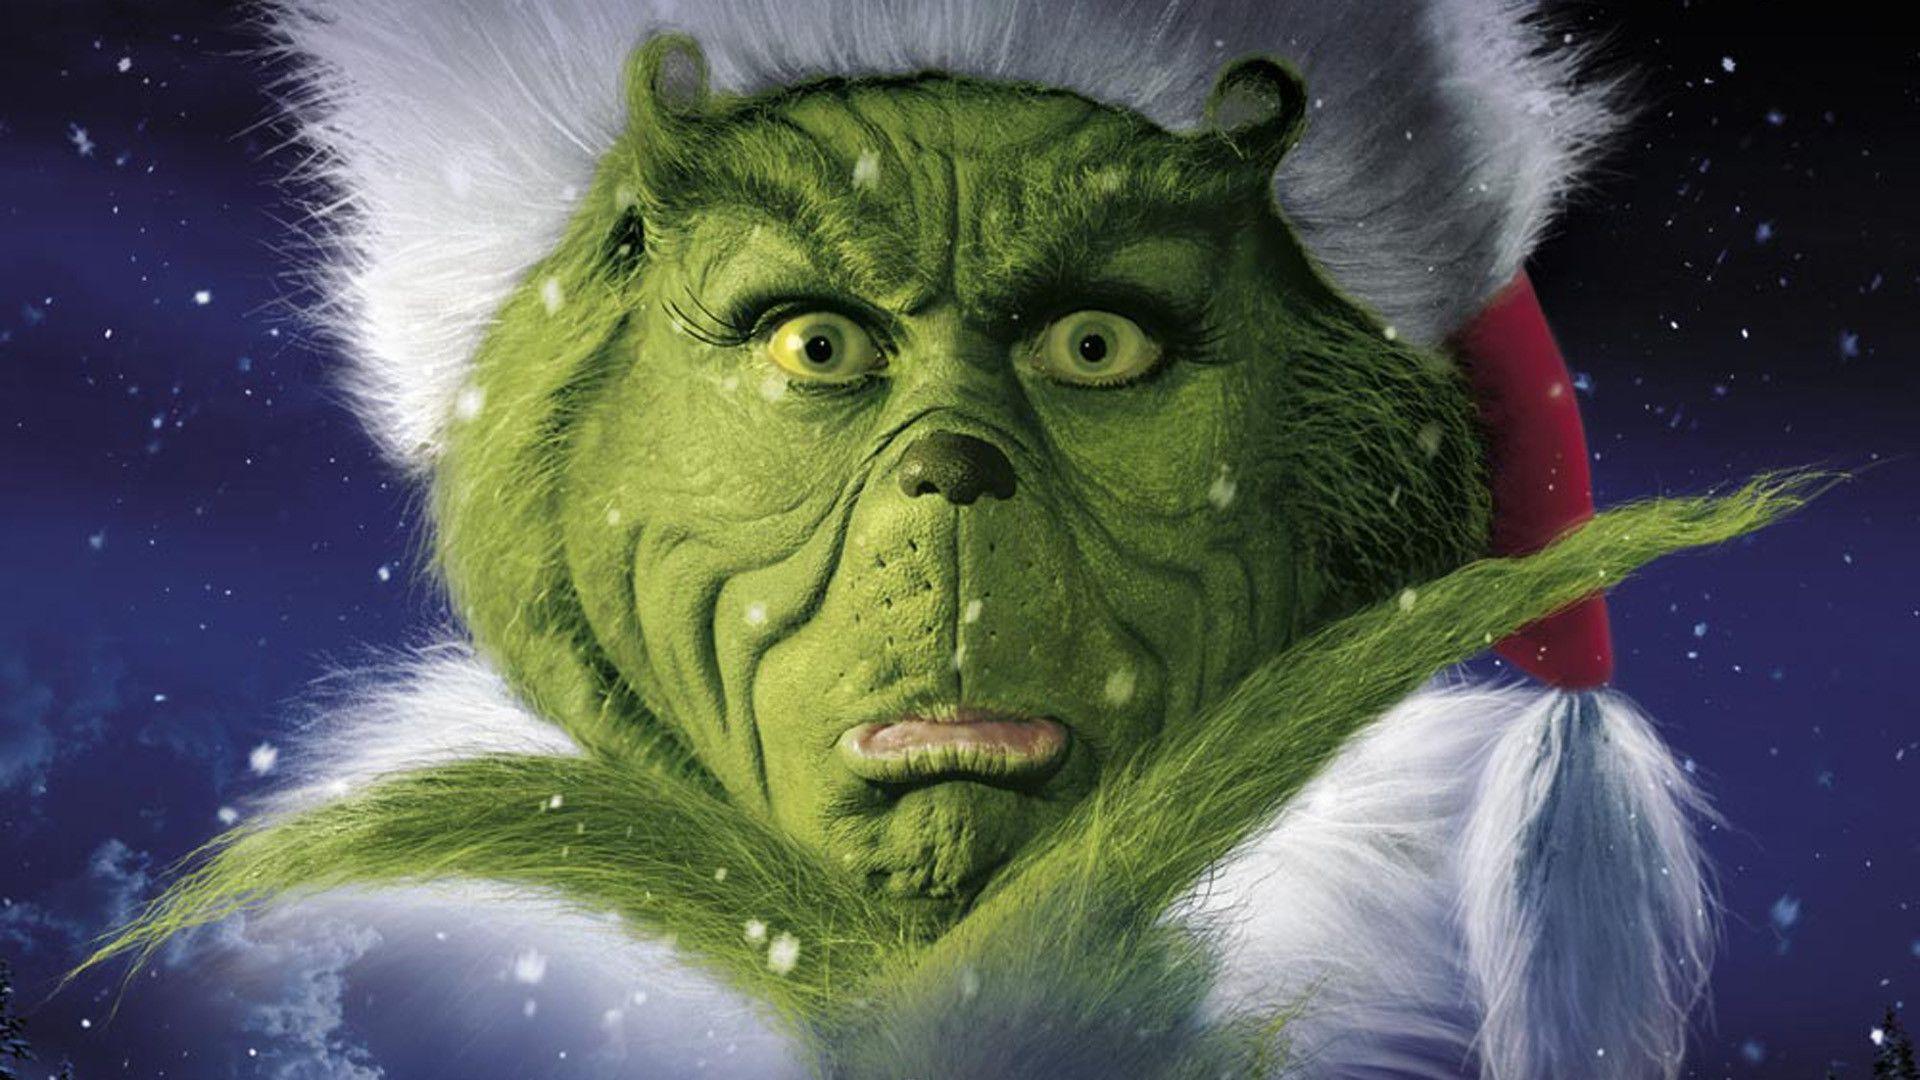 Grinch Throws a Mean Party in Tamarac: No Parents Allowed